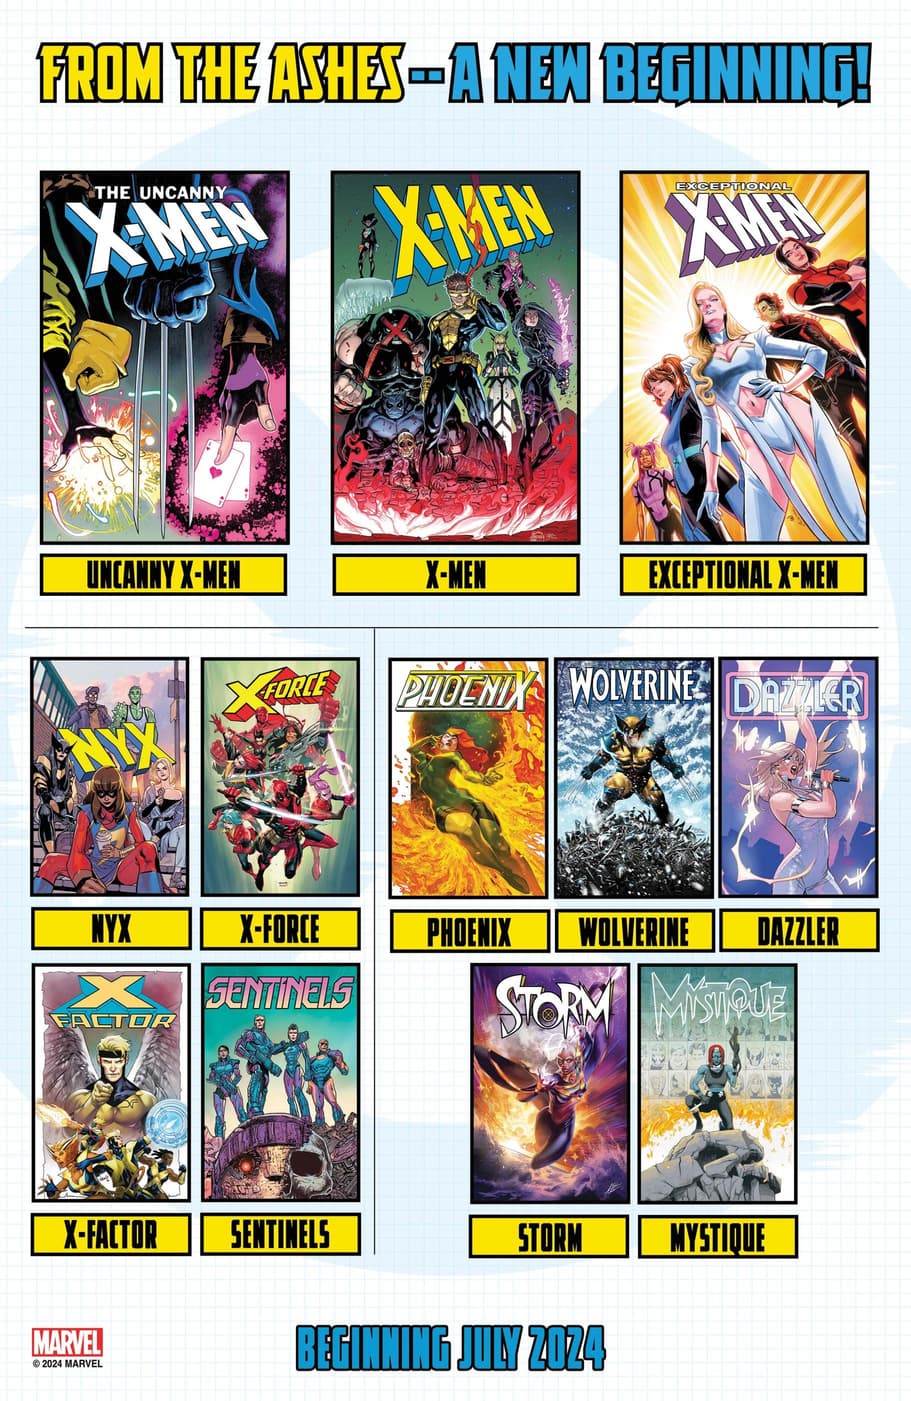 X-Men: From the Ashes checklist